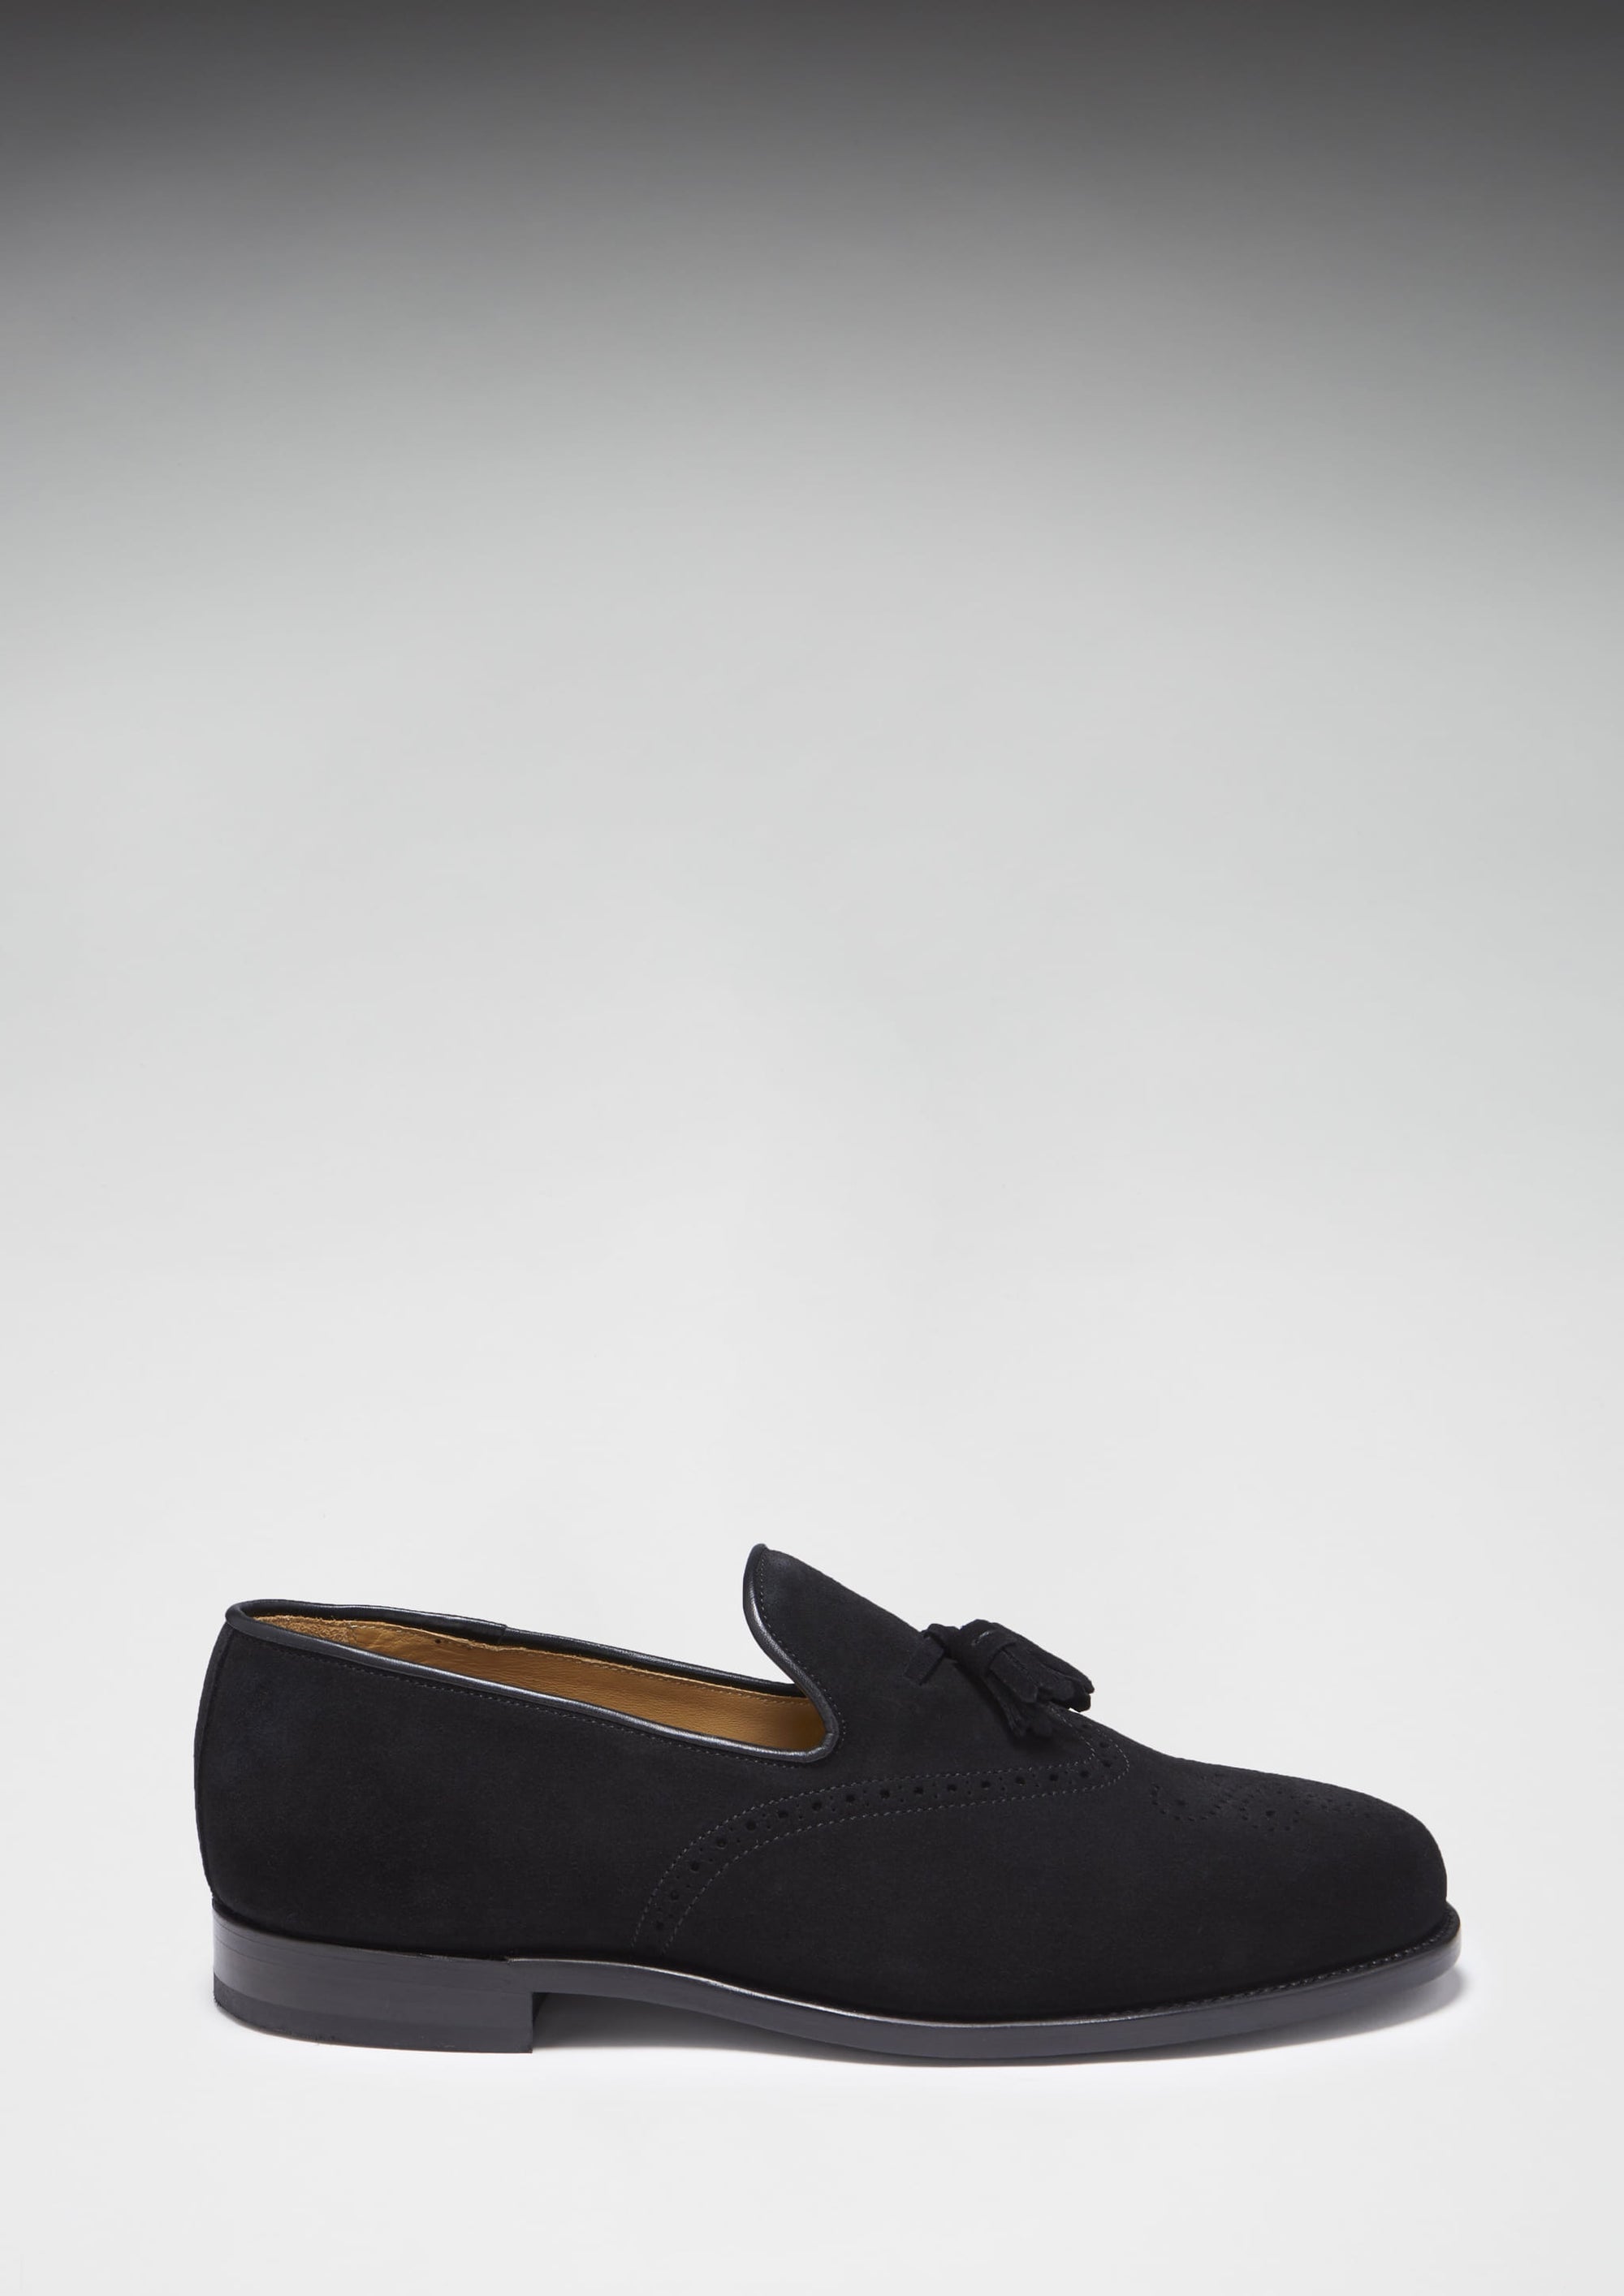 Side on, Black Suede Tasselled Brogues, Welted Leather Sole Hugs & Co.